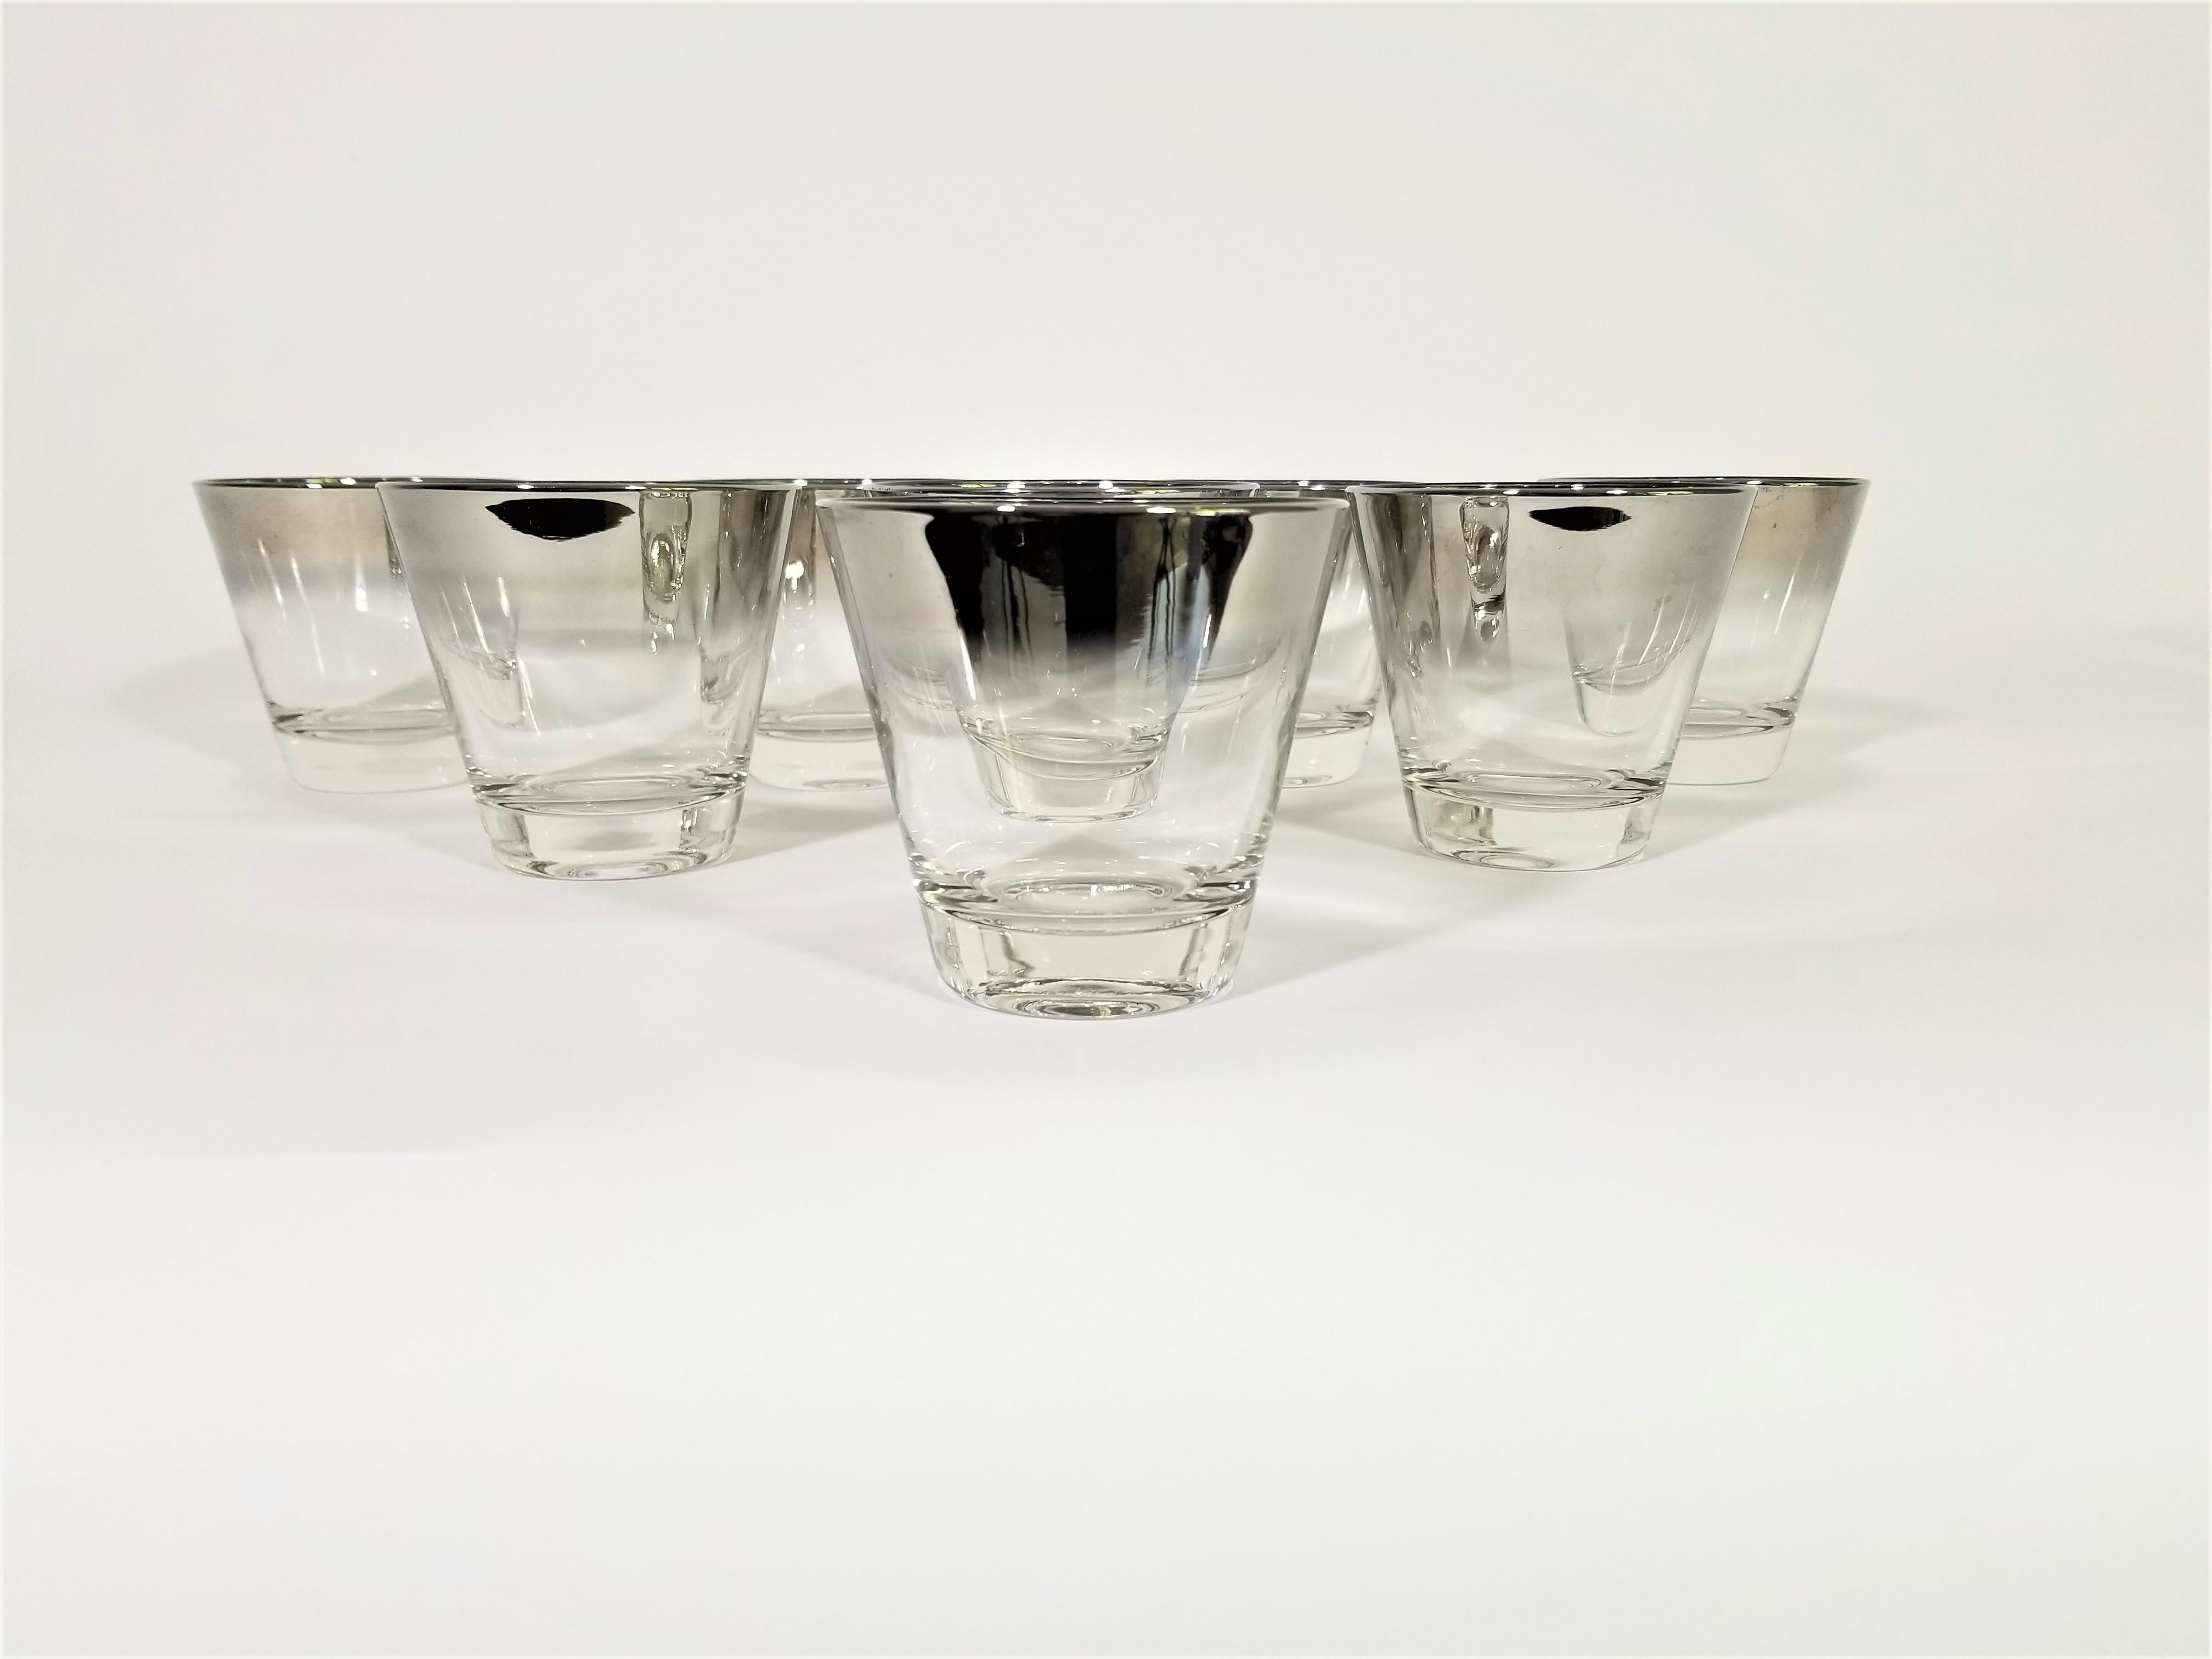 Midcentury complete set of 8 Dorothy Thorpe glasses with silver fade. Perfect addition to any bar or tableware. Flexible size for multi-use Rocks glass or wine glass etc.
Excellent condition.